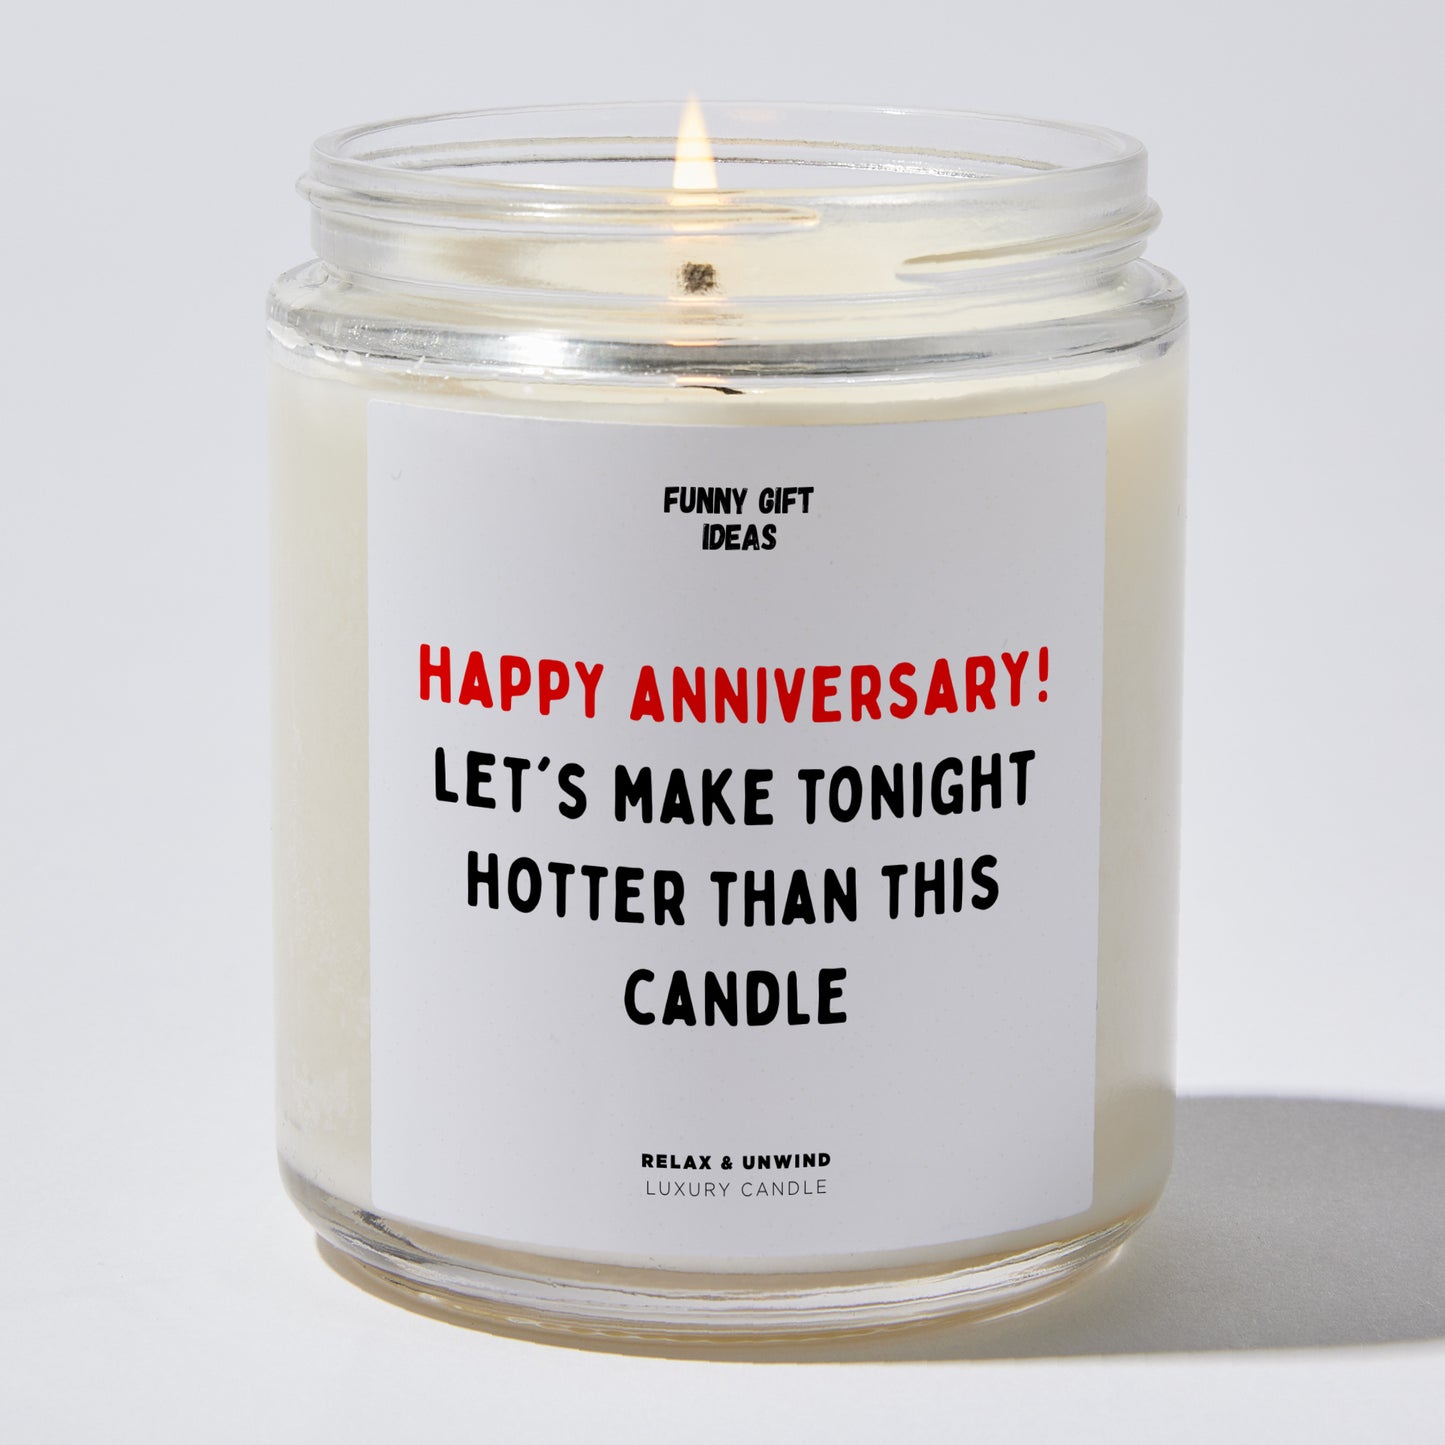 Anniversary Gift - Happy Anniversary! Let's Make Tonight Hotter Than This Candle - Candle